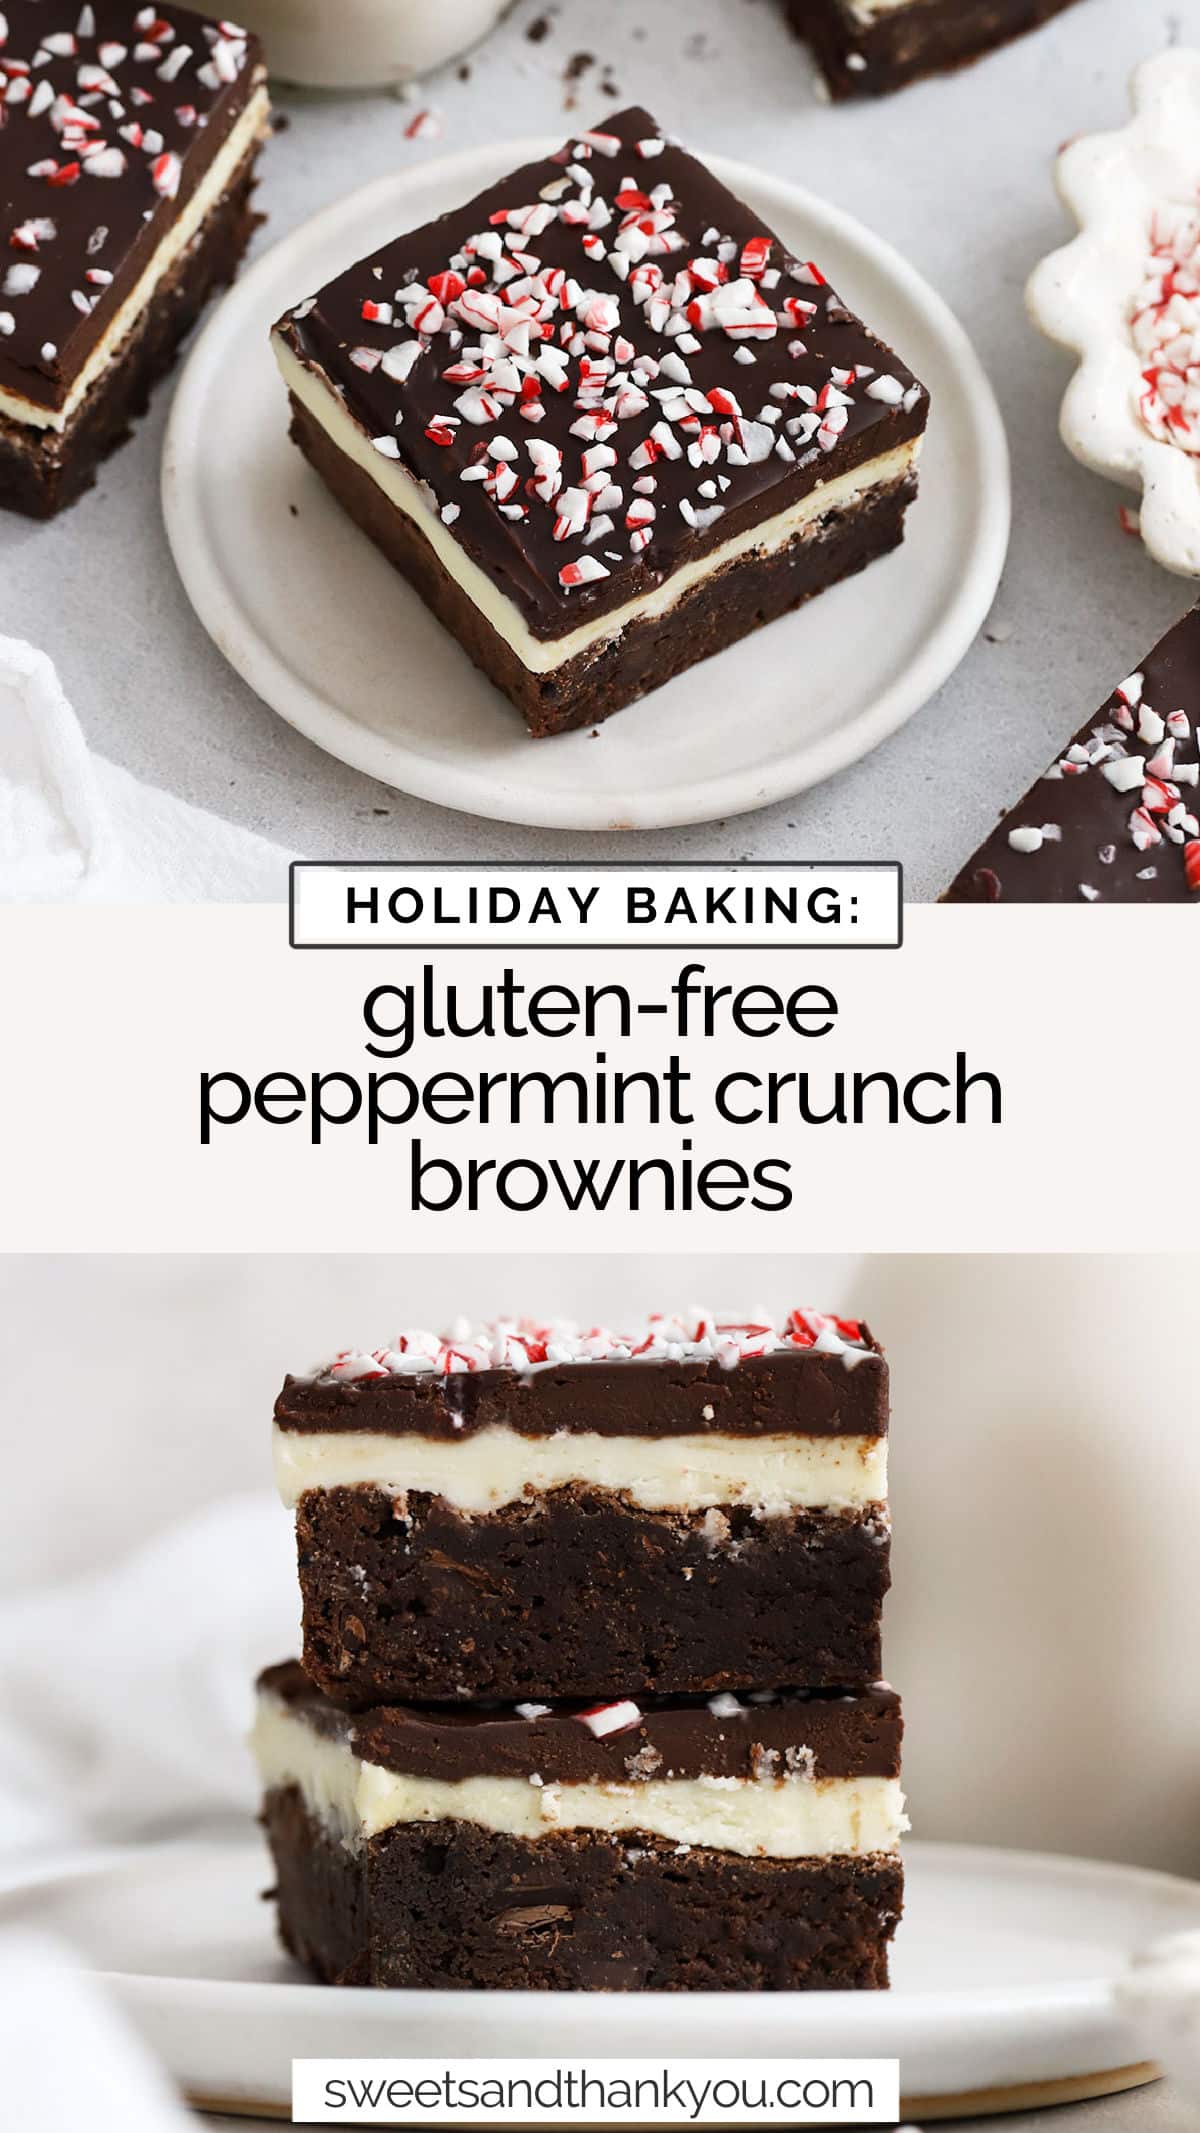 Our Gluten-Free Peppermint Crunch Brownies (aka Christmas Brownies or Peppermint Bark Brownies!) are made with layers of chewy gluten-free brownies, peppermint frosting, an easy chocolate ganache & crunchy bits candy cane! They're the perfect gluten-free brownies for the holidays. Try adding them to a gluten-free cookie exchange or holiday treat plate for a little extra holiday cheer!